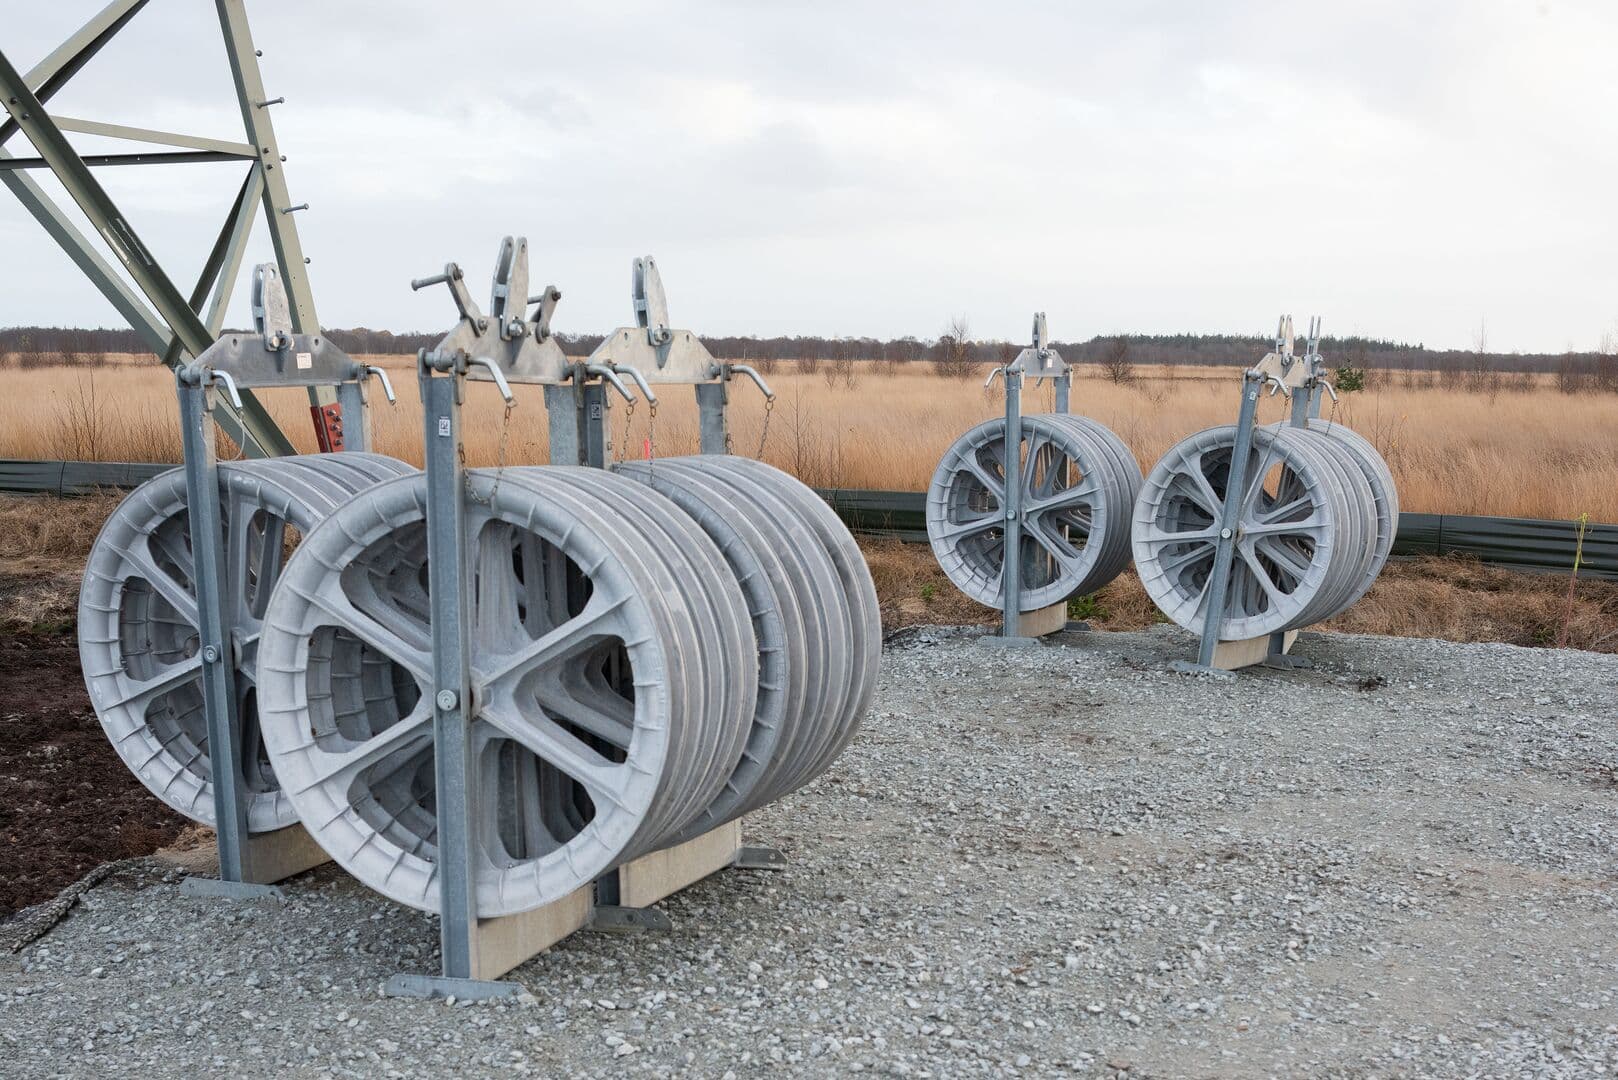 Empty spools used for cable pulling